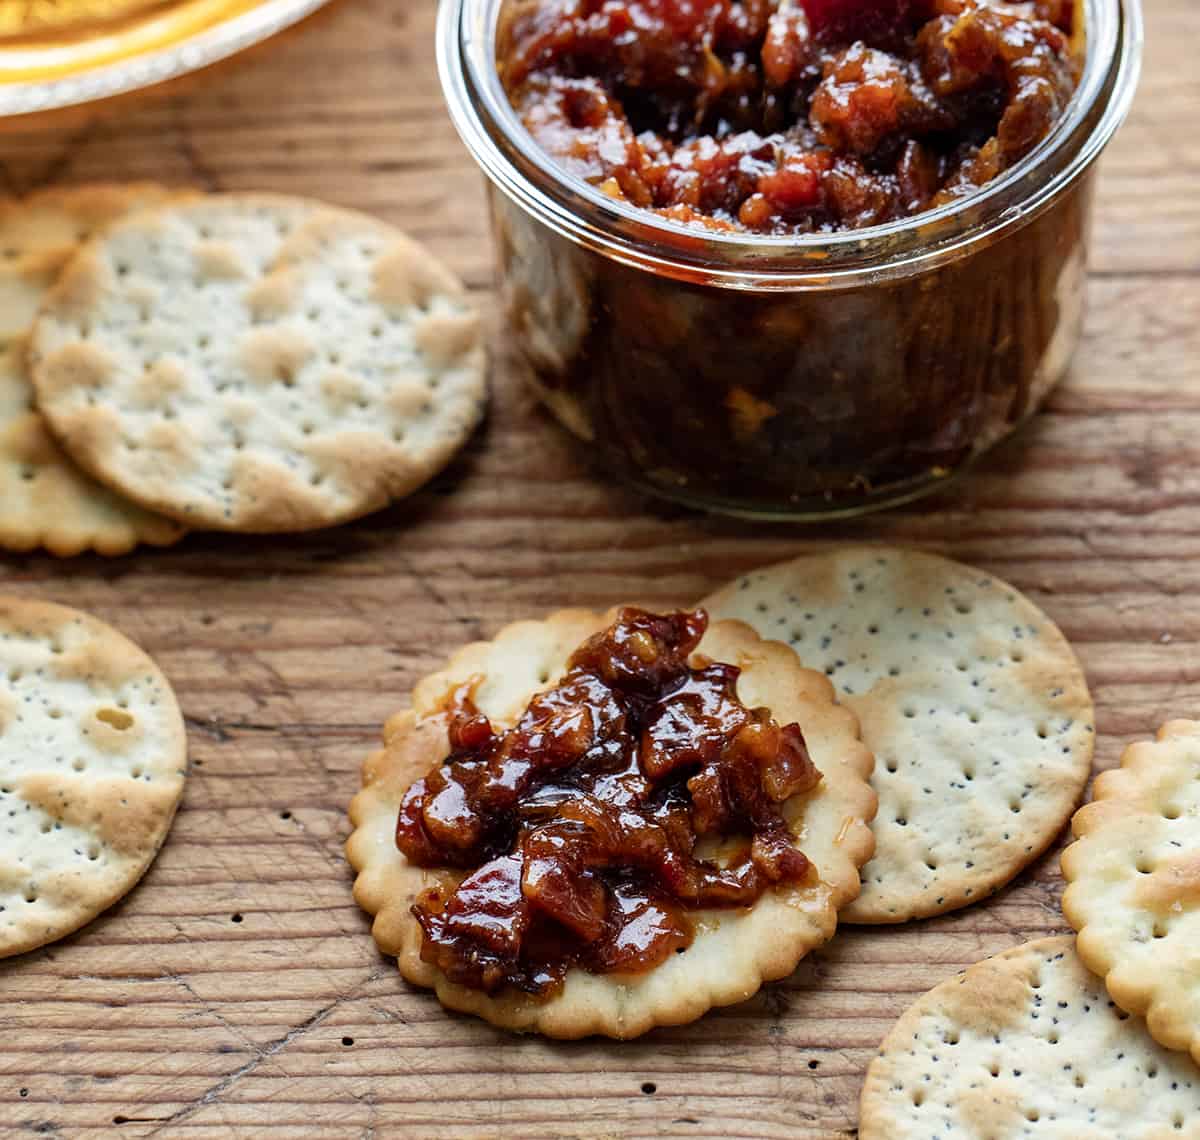 Cracker with Whiskey Bacon Jam on it Next to a Jar of Whiskey Bacon Jam.